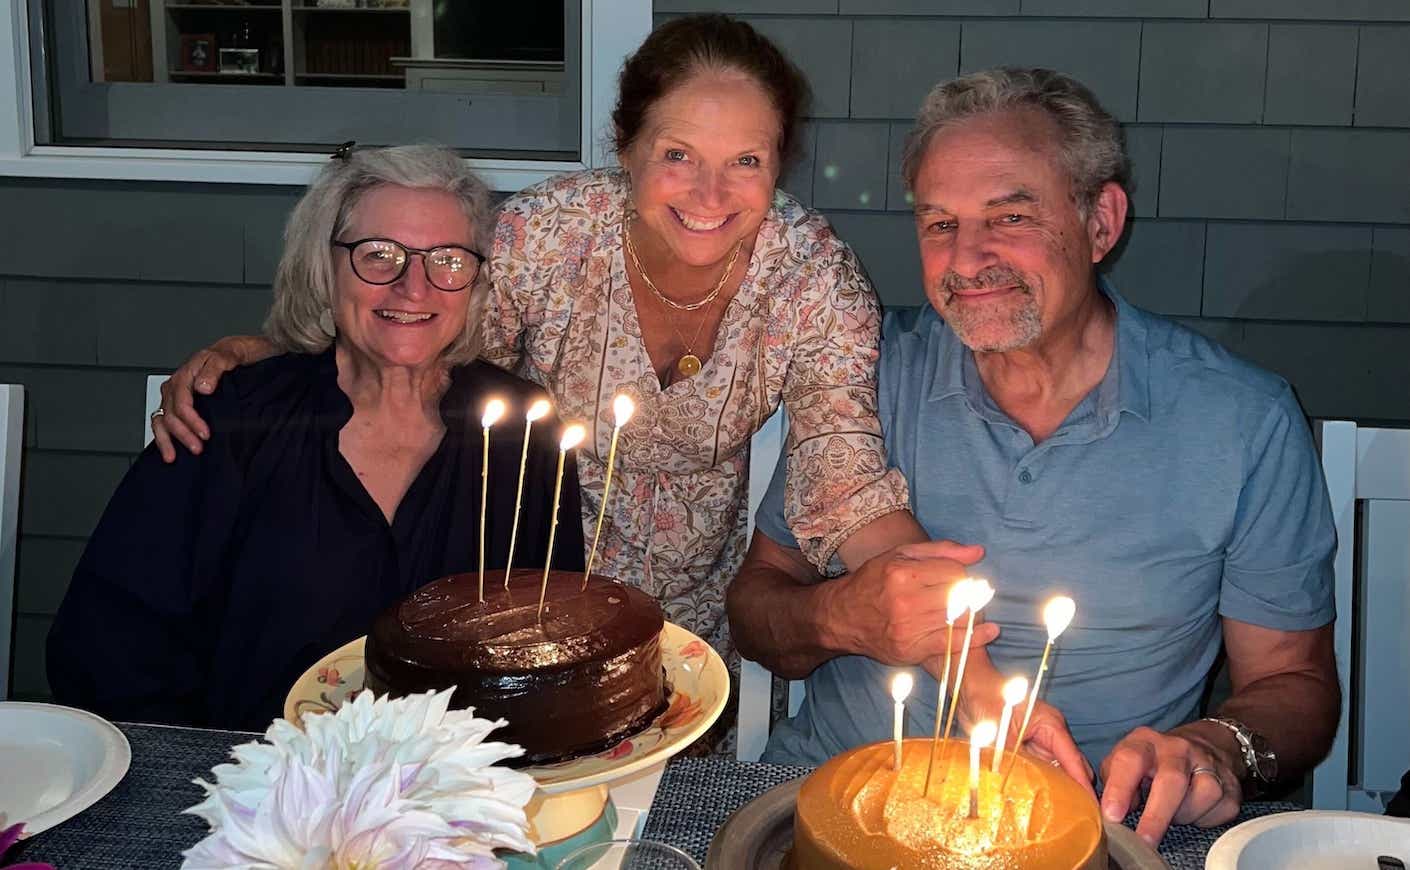 Katie couric with her sister and brother